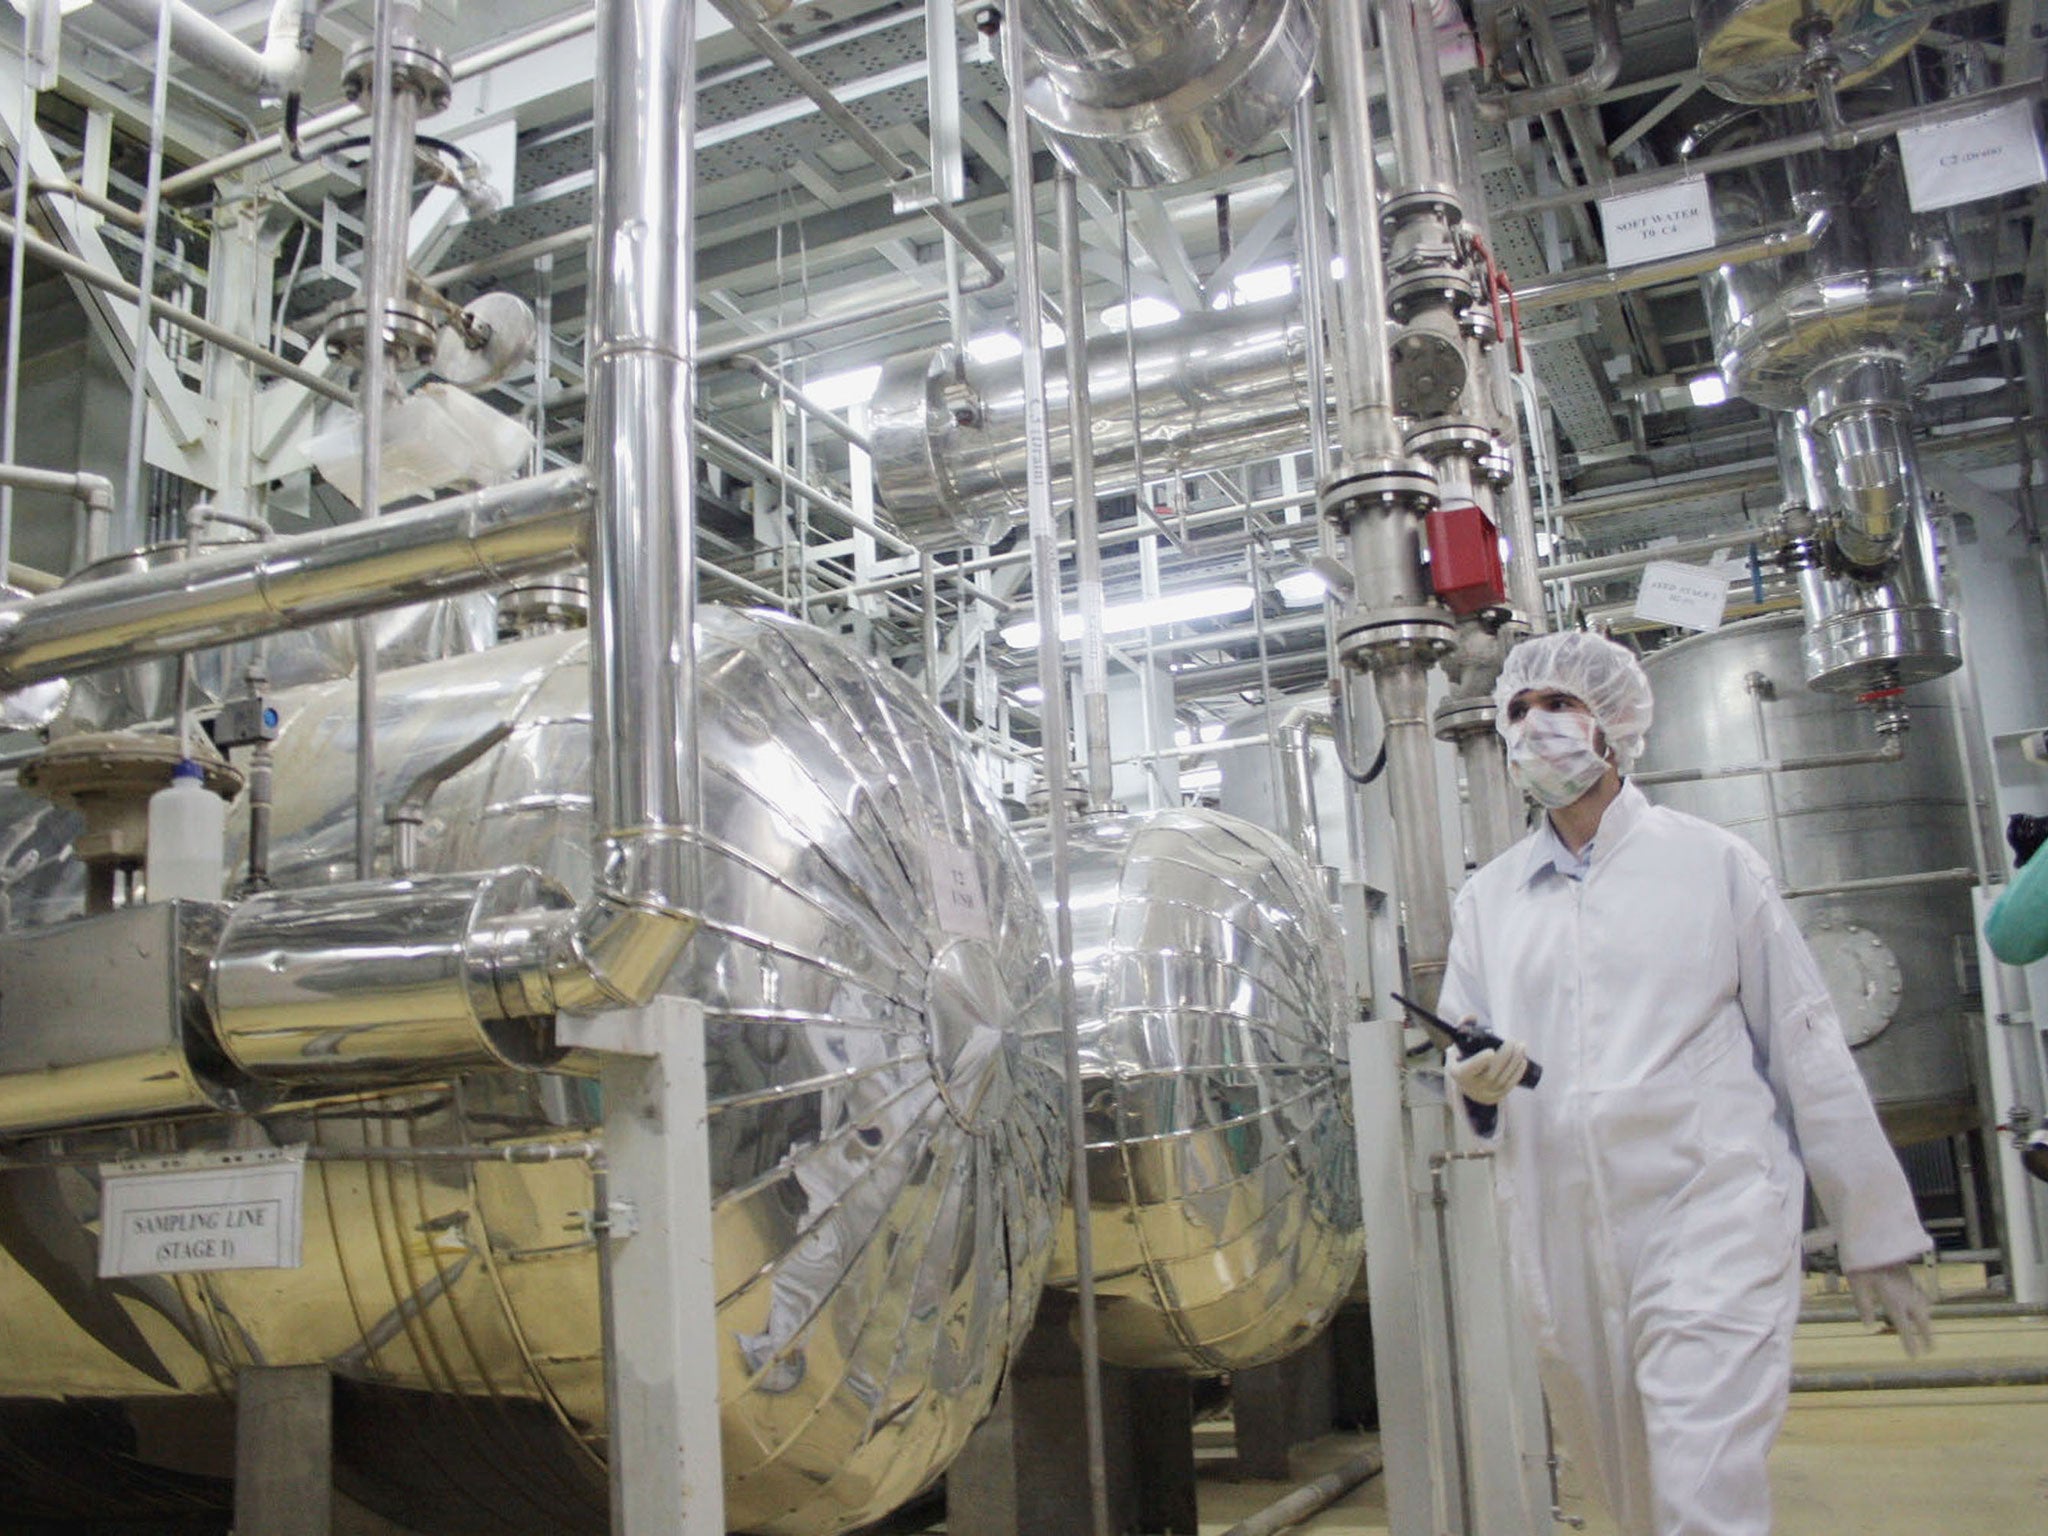 A uranium conversion facility outside the city of Isfahan, south of Tehran. Iran has insisted to sceptical Western powers that its nuclear ambitions are entirely peaceful